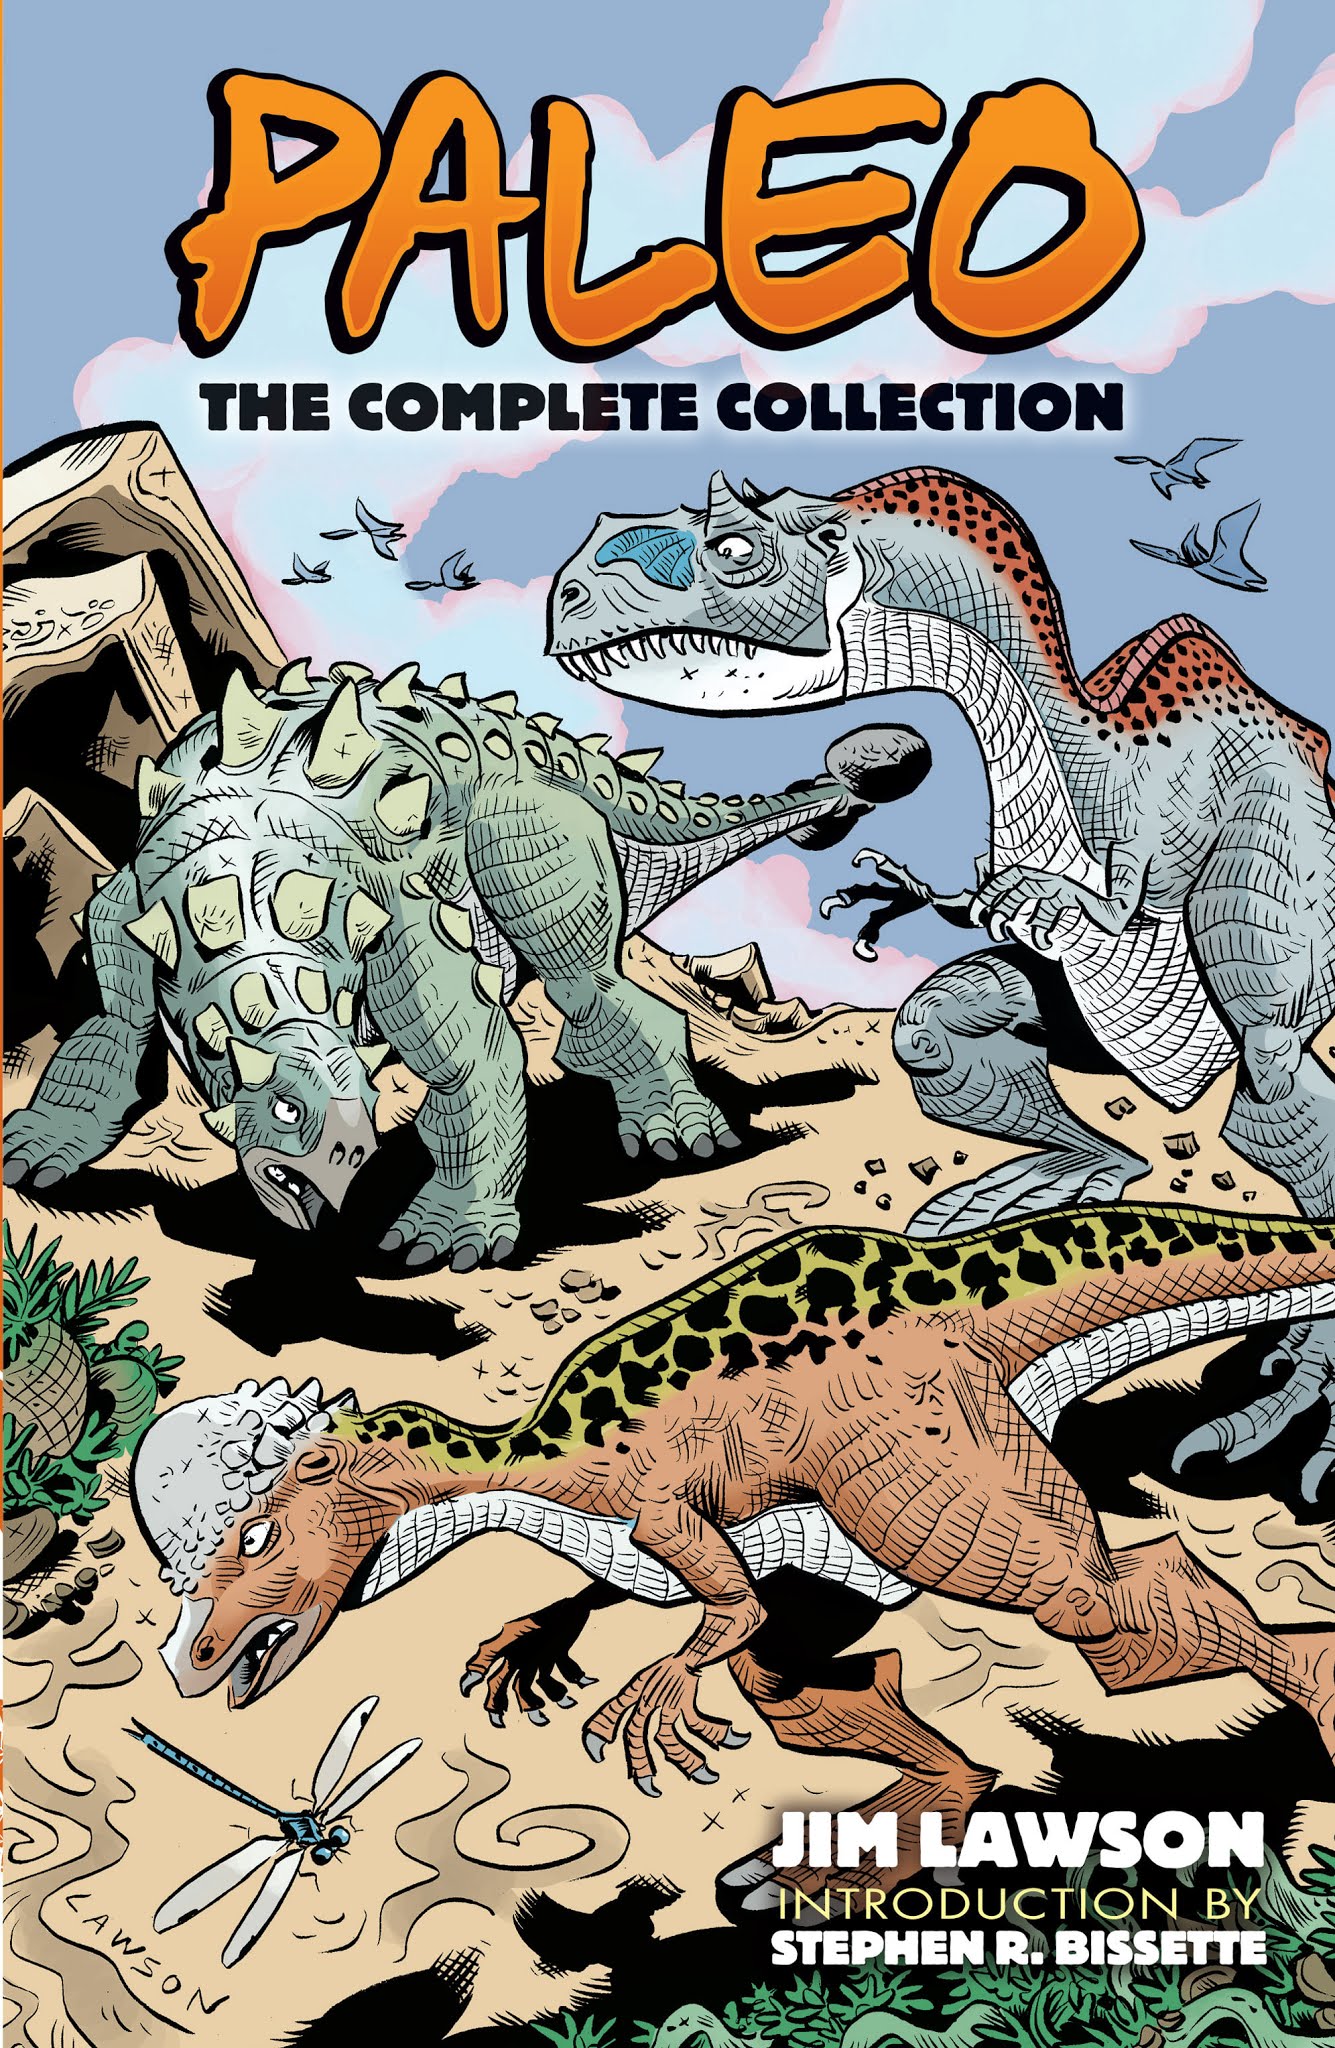 Read online Paleo: Tales of the late Cretaceous comic -  Issue # TPB (Part 1) - 1